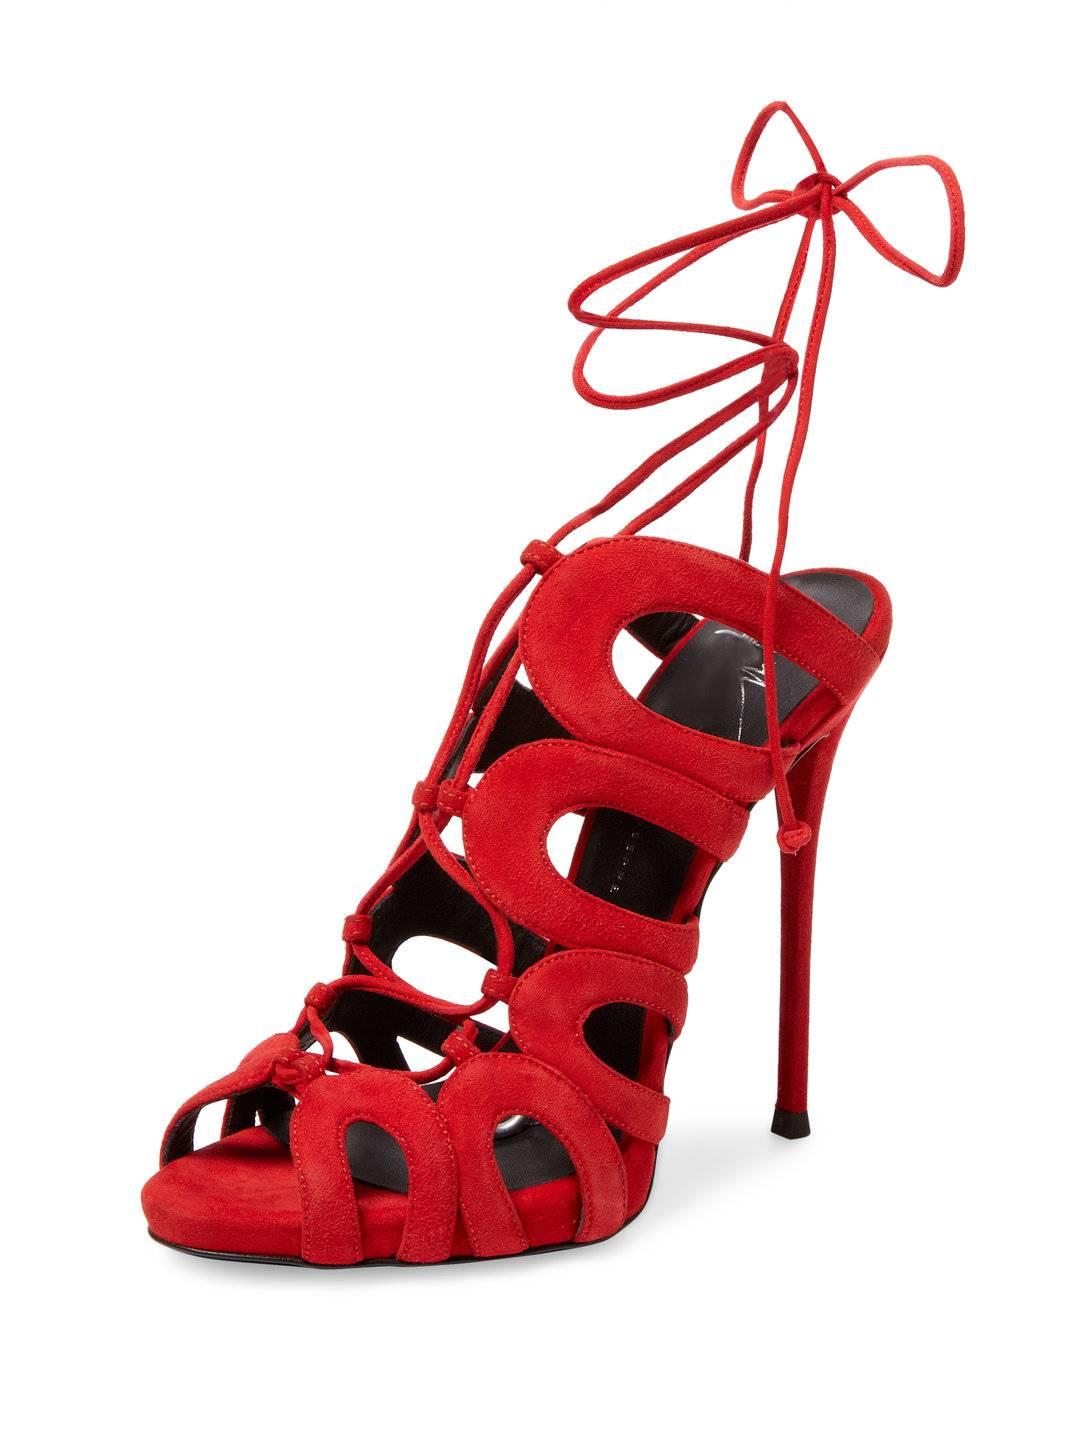 Giuseppe Zanotti New Red Suede Cut Out Tie Evening Sandals Heels in Box 

Size IT 36 - Our only pair!
Suede 
Ankle tie closure  
Made in Italy  
Heel height 5"  
Includes original Giuseppe Zanotti box